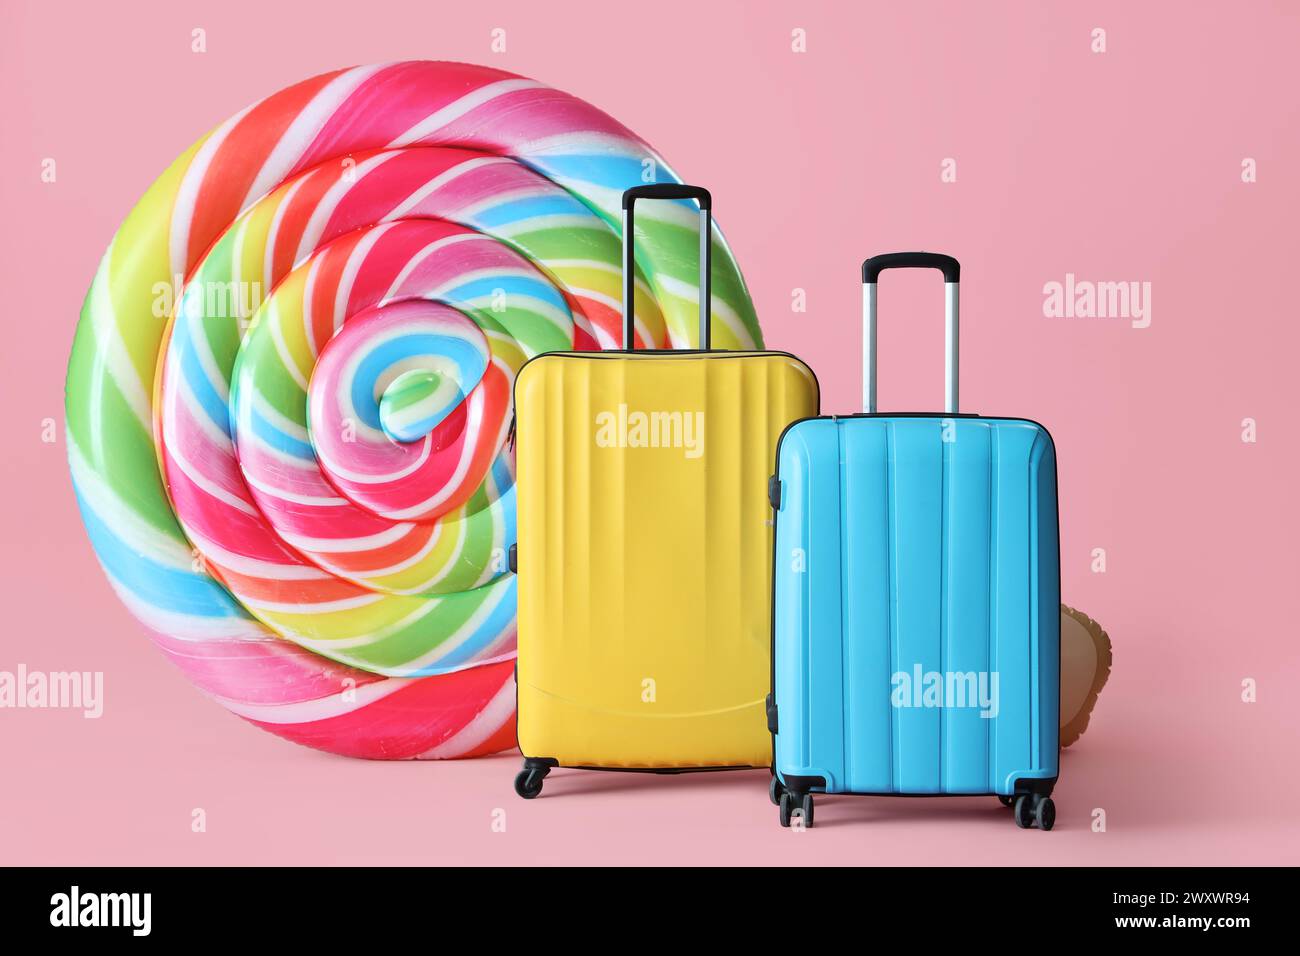 Inflatable mattress in shape of candy and suitcases on pink background Stock Photo